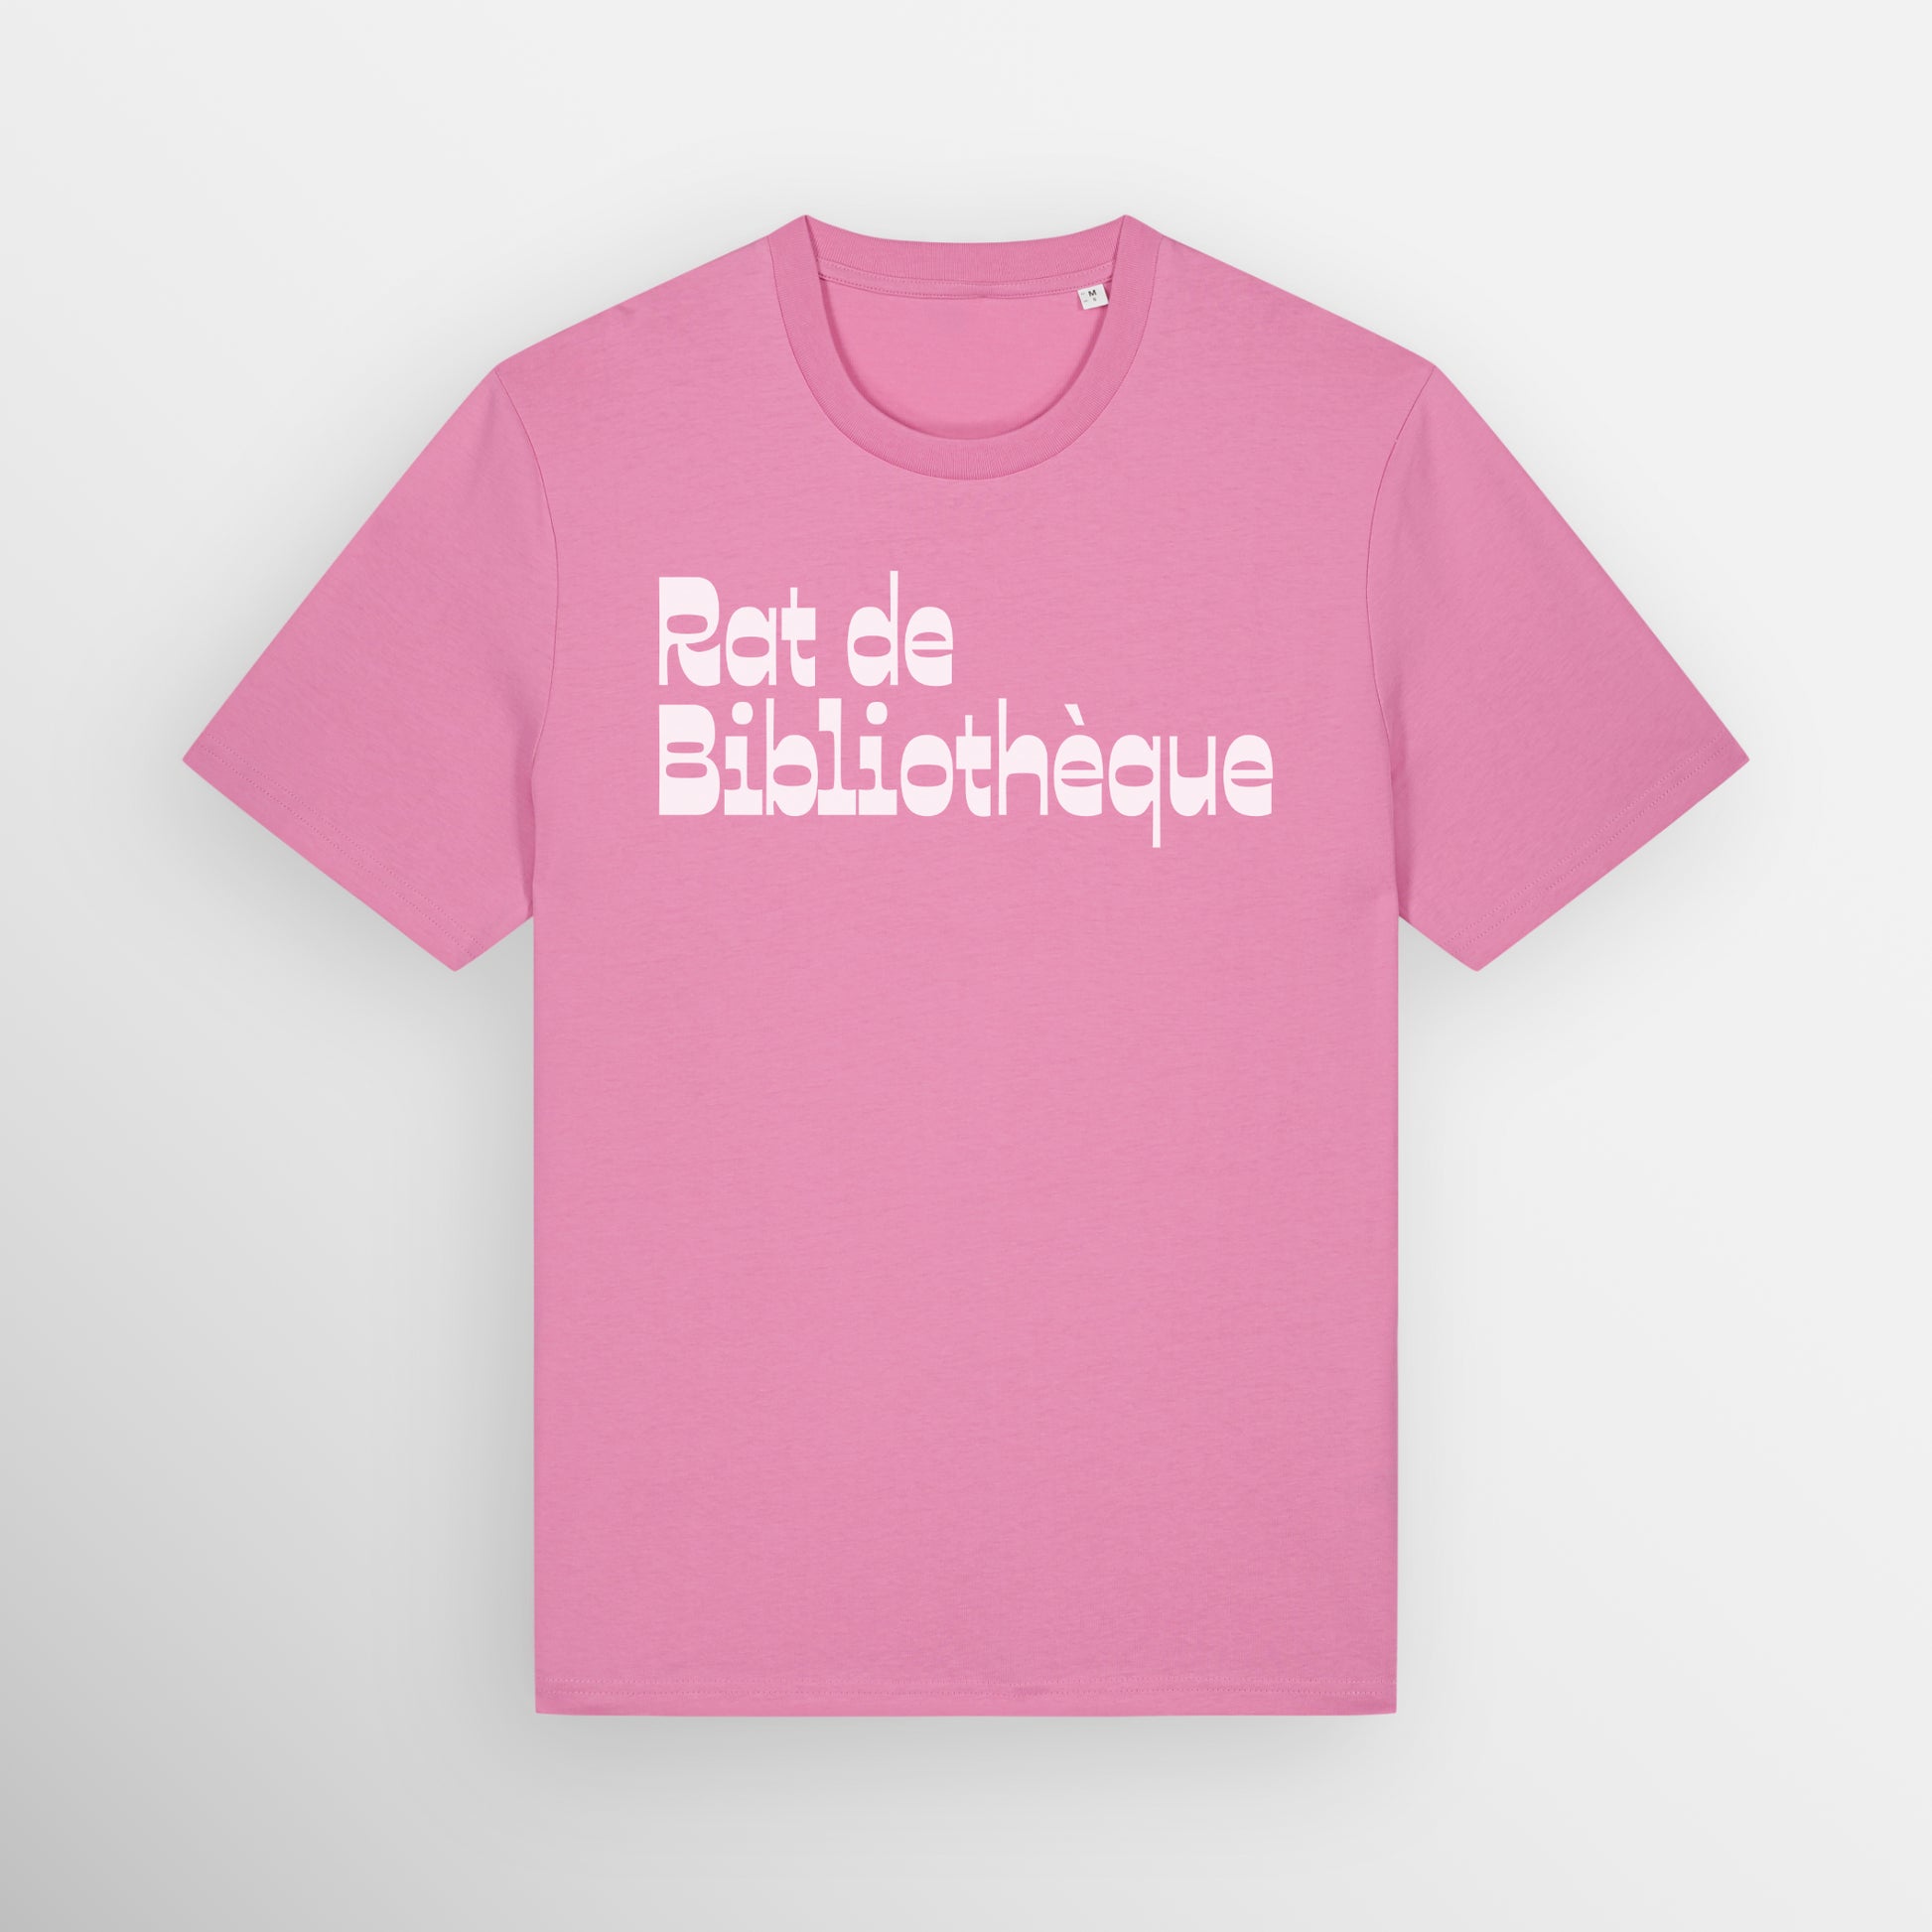 Bubblegum Pink coloured regular fit t-shirt with Rat de Bibliothèque written on the front in white, which is French for bookworm.